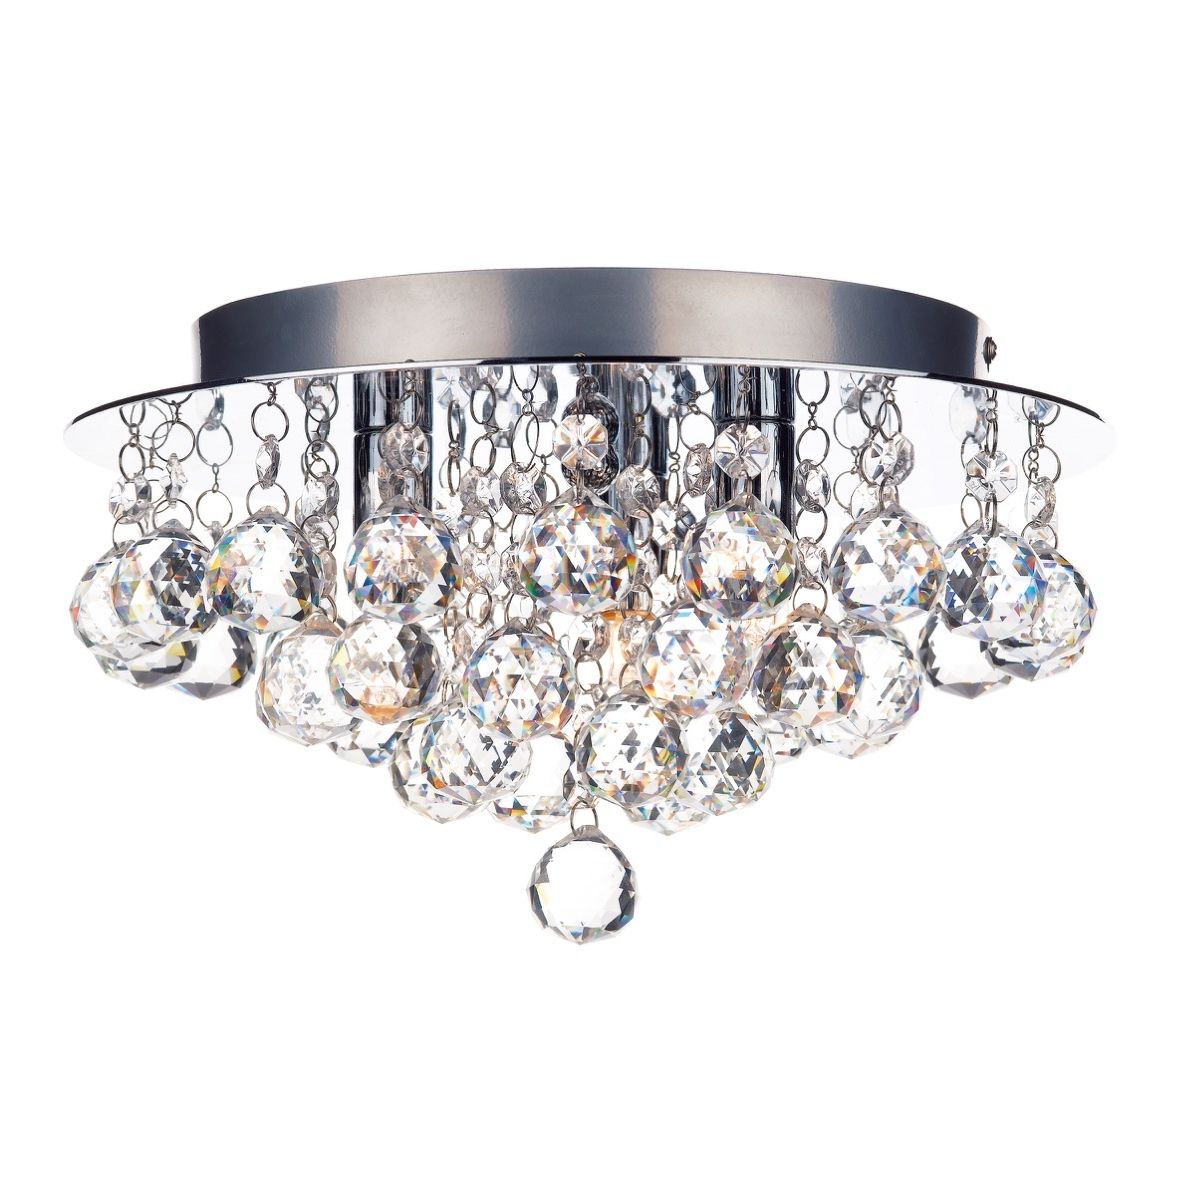 2020 Crystal Flush Ceiling Light – Polished Chrome – Small For Chrome And Crystal Pendant Lights (View 10 of 20)